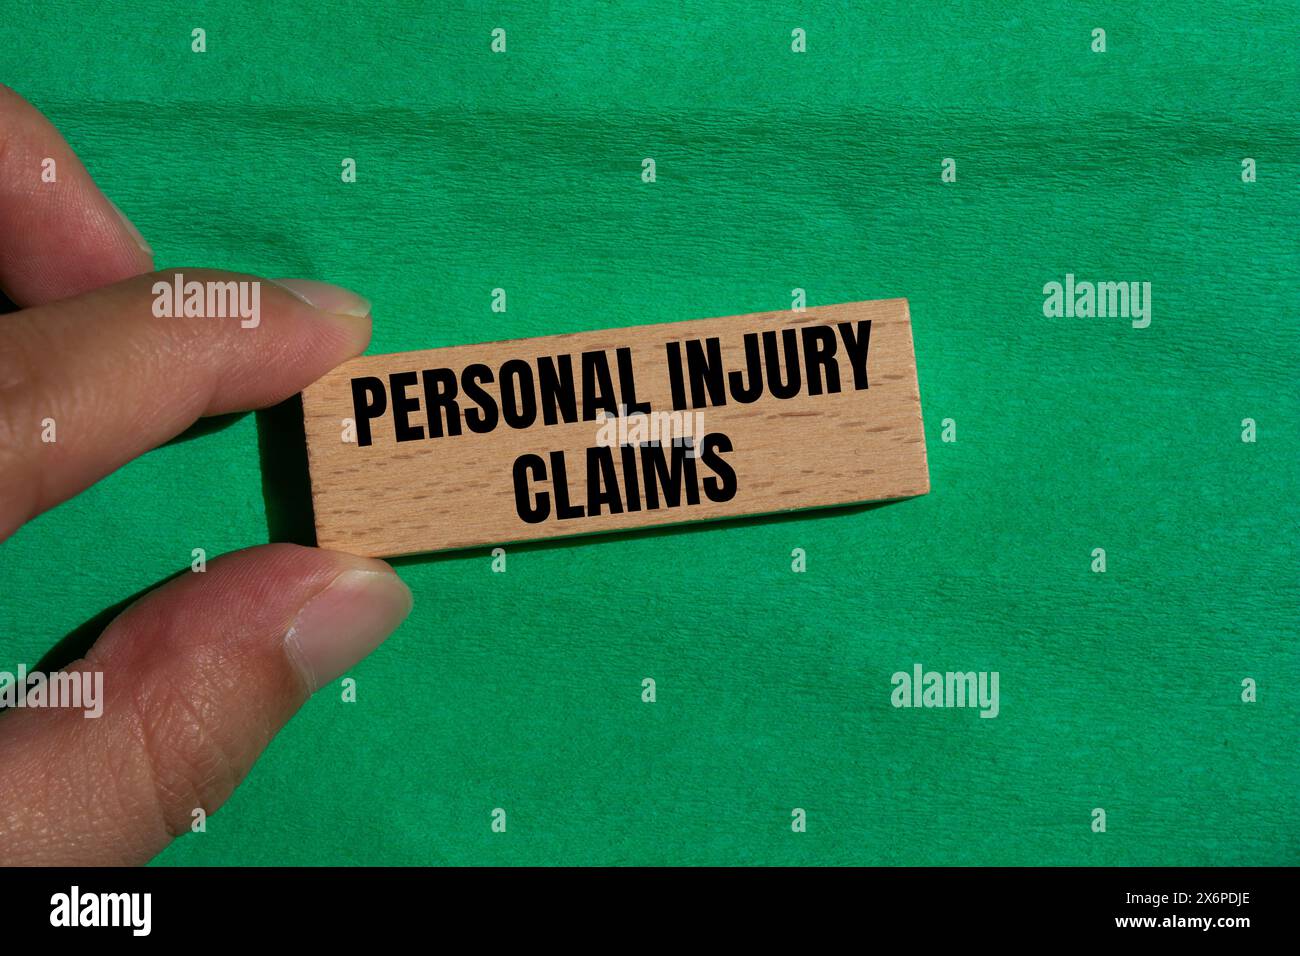 Personal injury claims written on wooden block with green background. Conceptual personal injury claims symbol. Copy space. Stock Photo